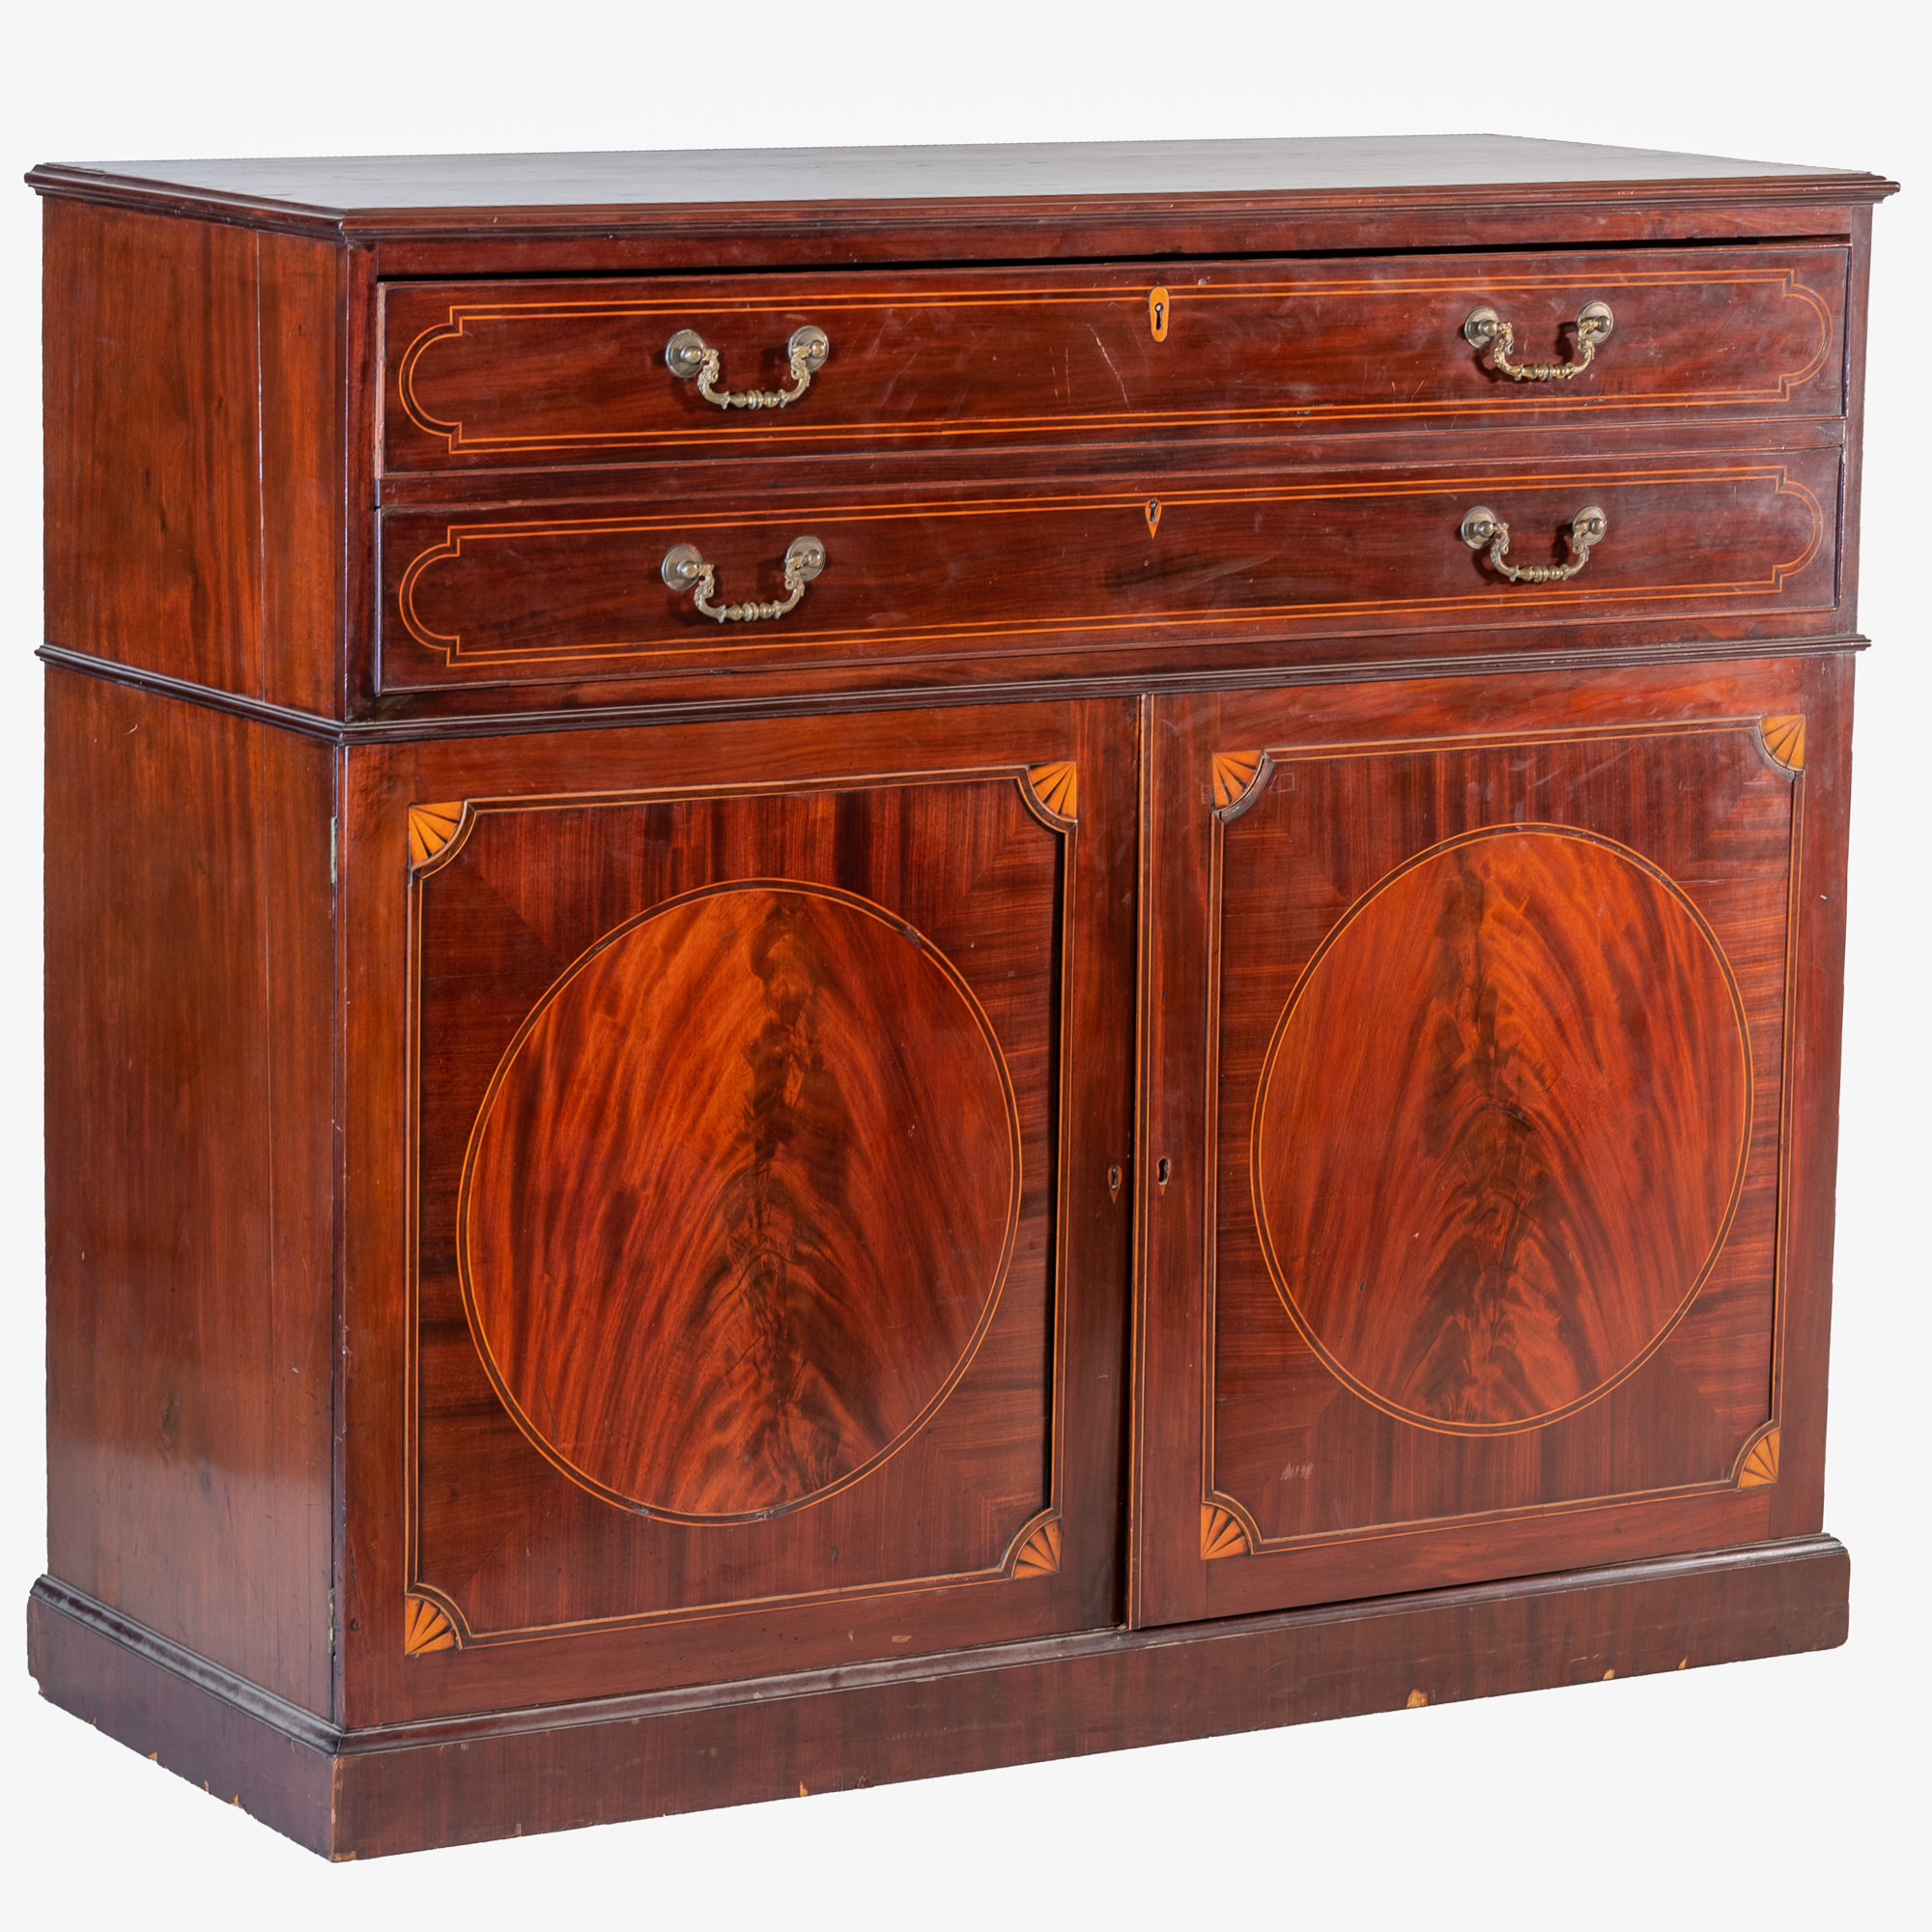 'George III Sheraton Inlaid Mahogany Secretaire with a Well Fitted Interior Circa 1800'